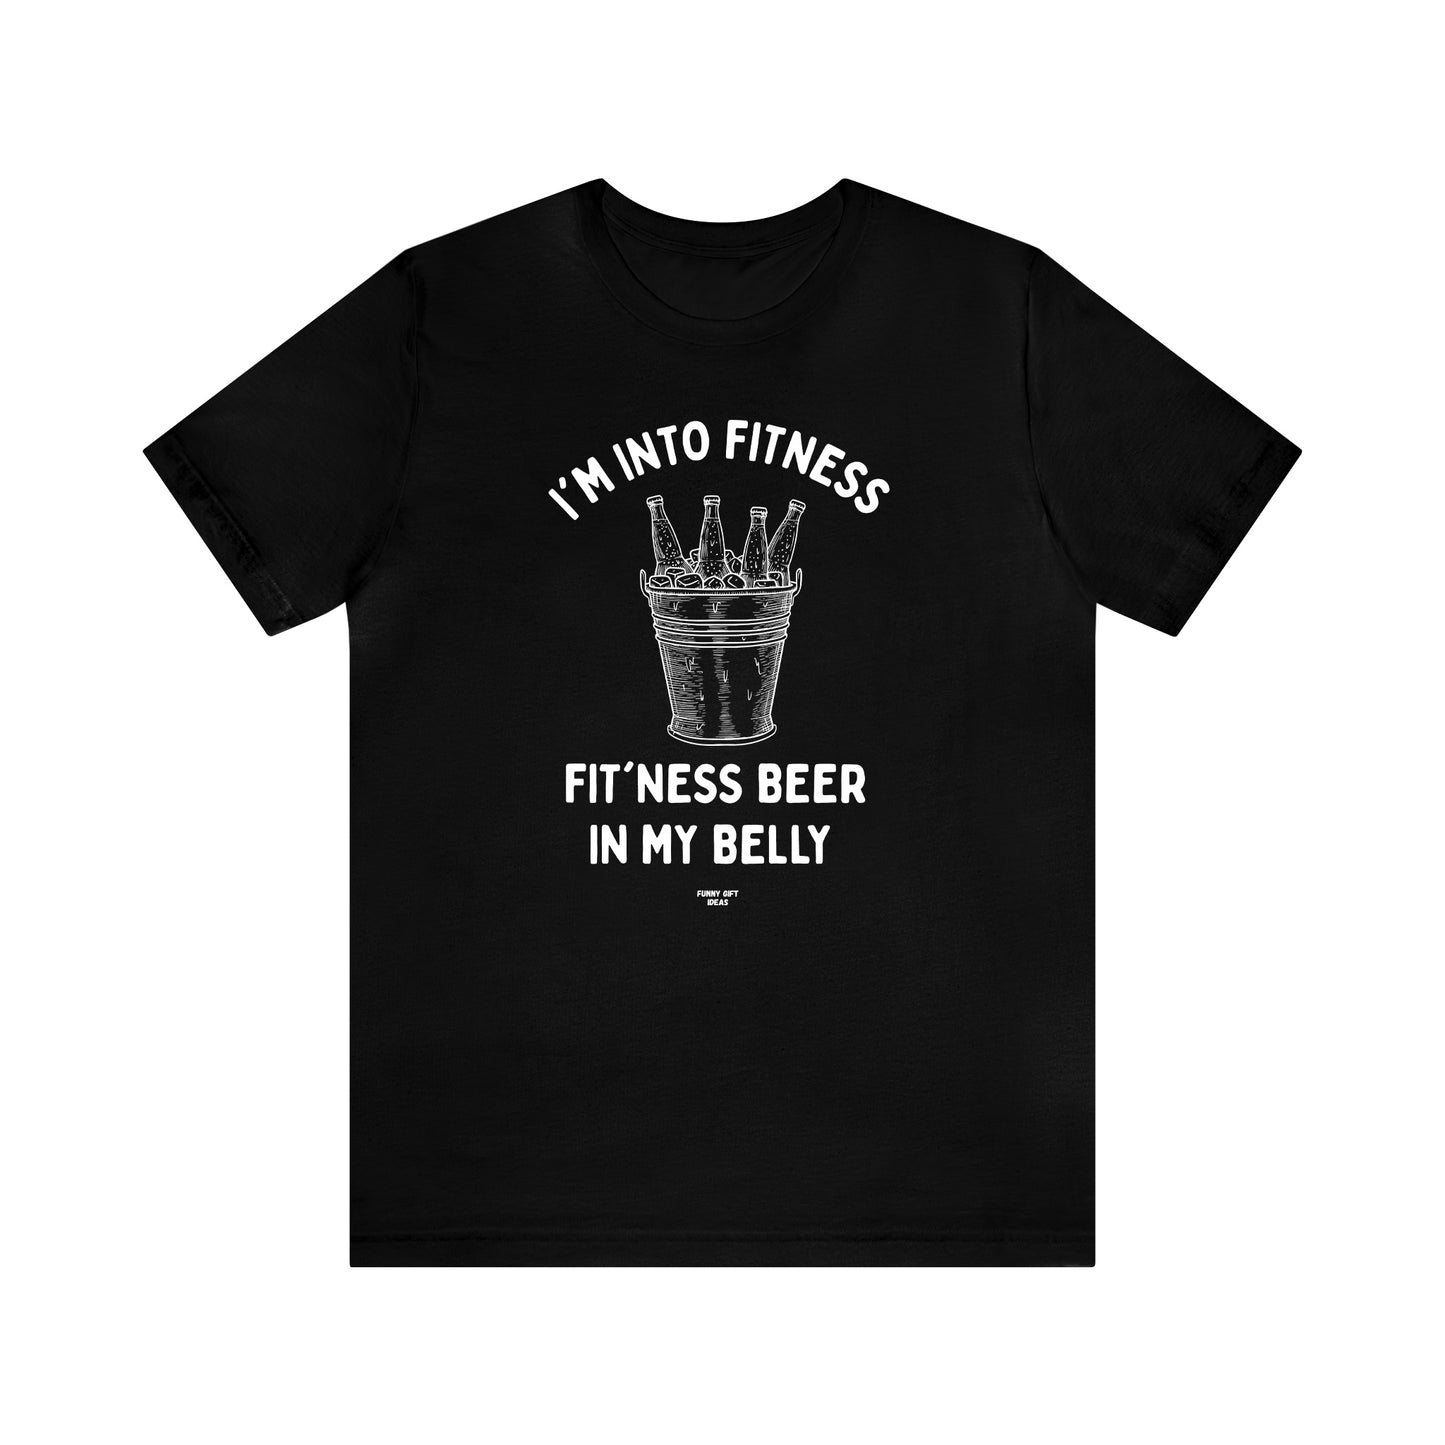 Mens T Shirts - I'm Into Fitness Fit'ness B--r in My Belly - Funny Men T Shirts